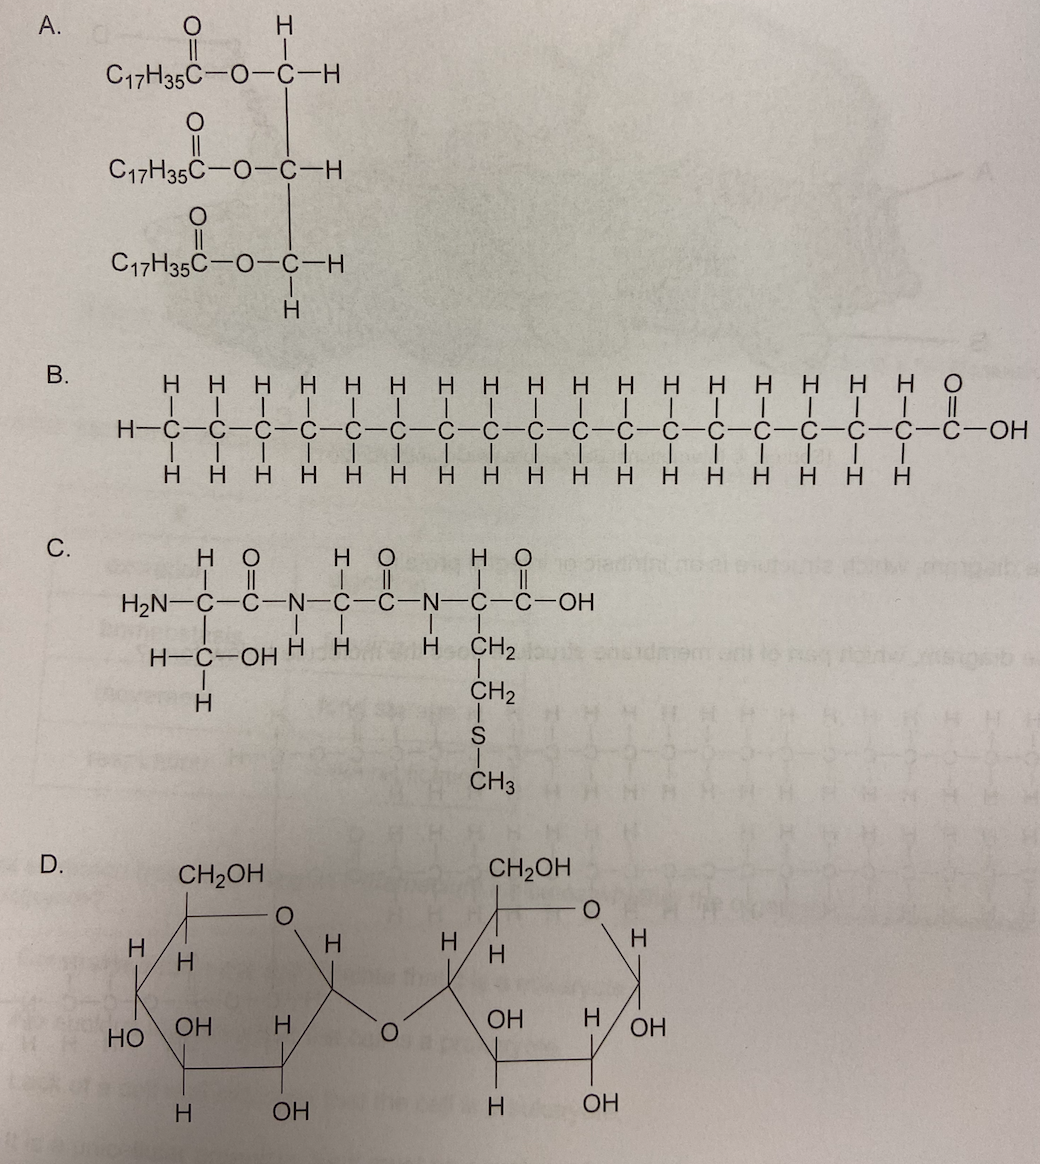 <p>Which molecule could be hydrolyzed into amino acids?</p>